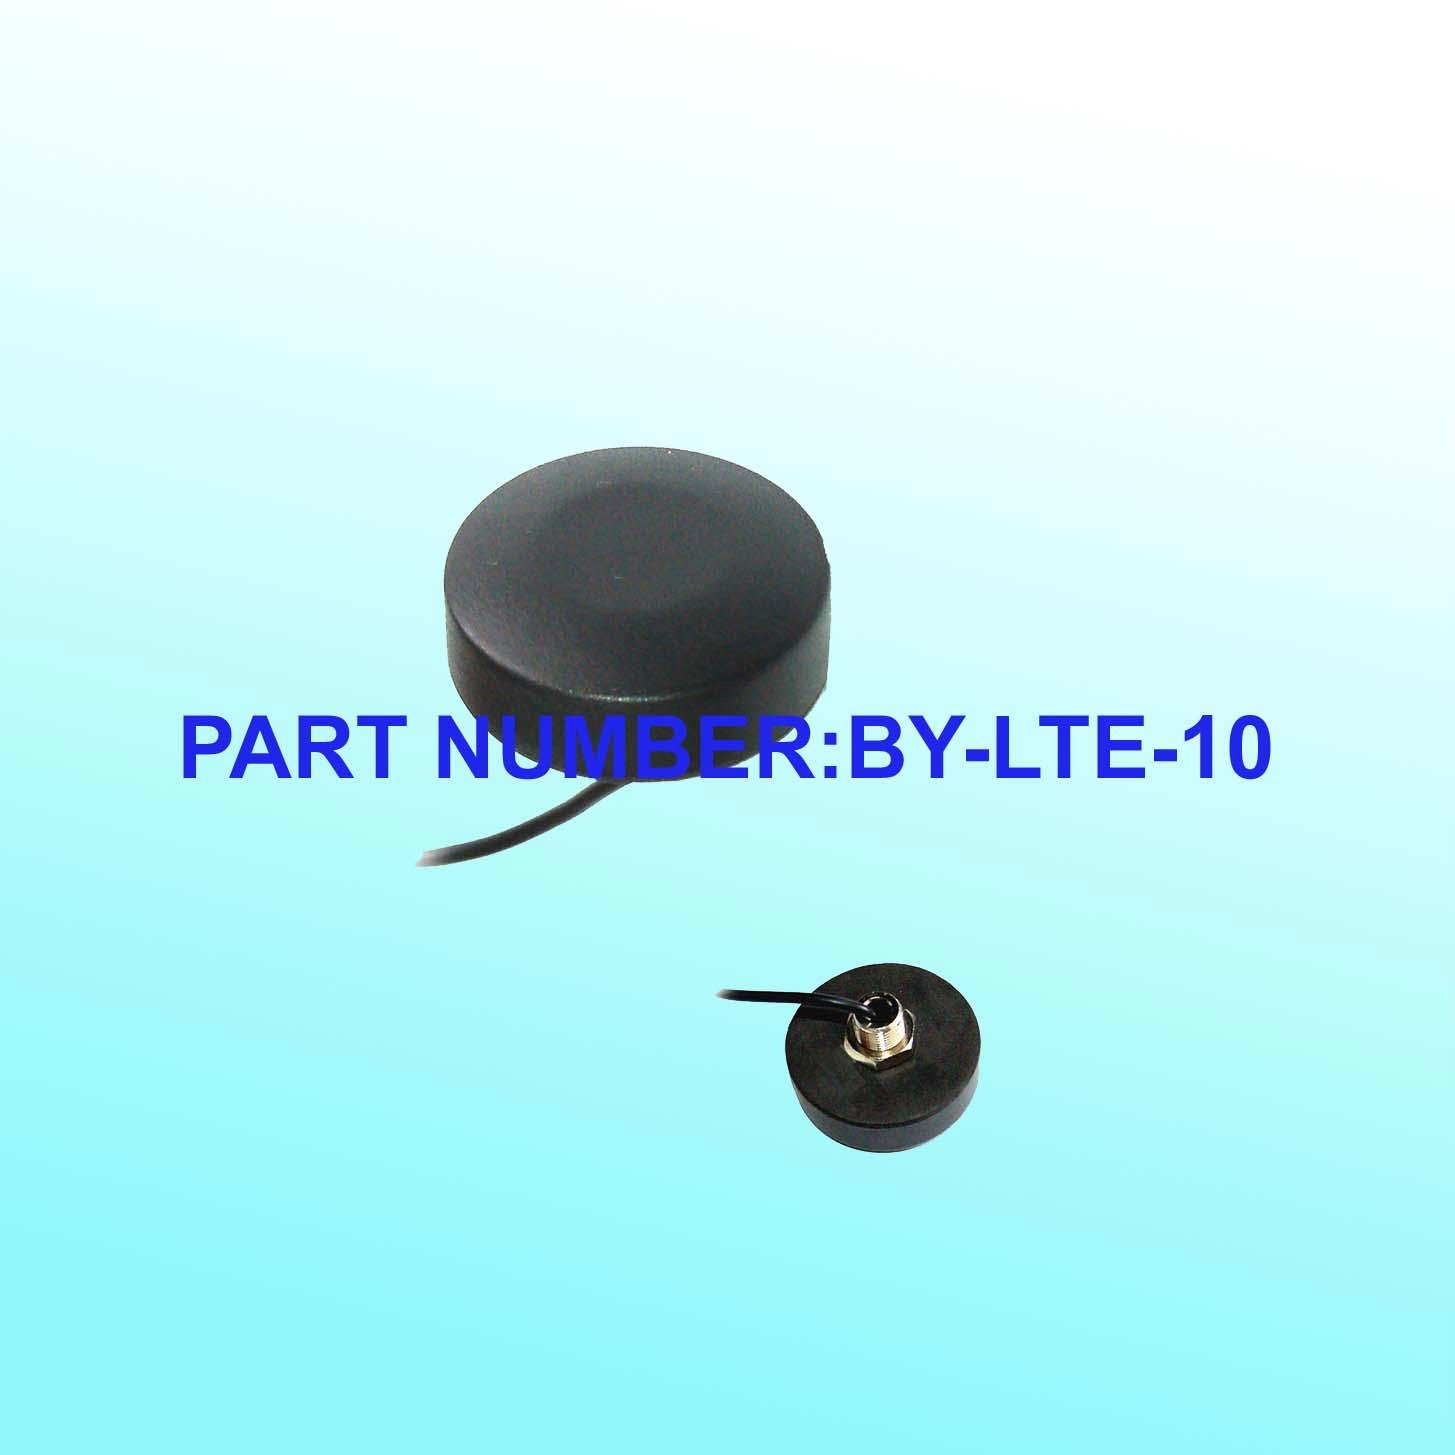 Lte/4G Antenna with Screw Mounting